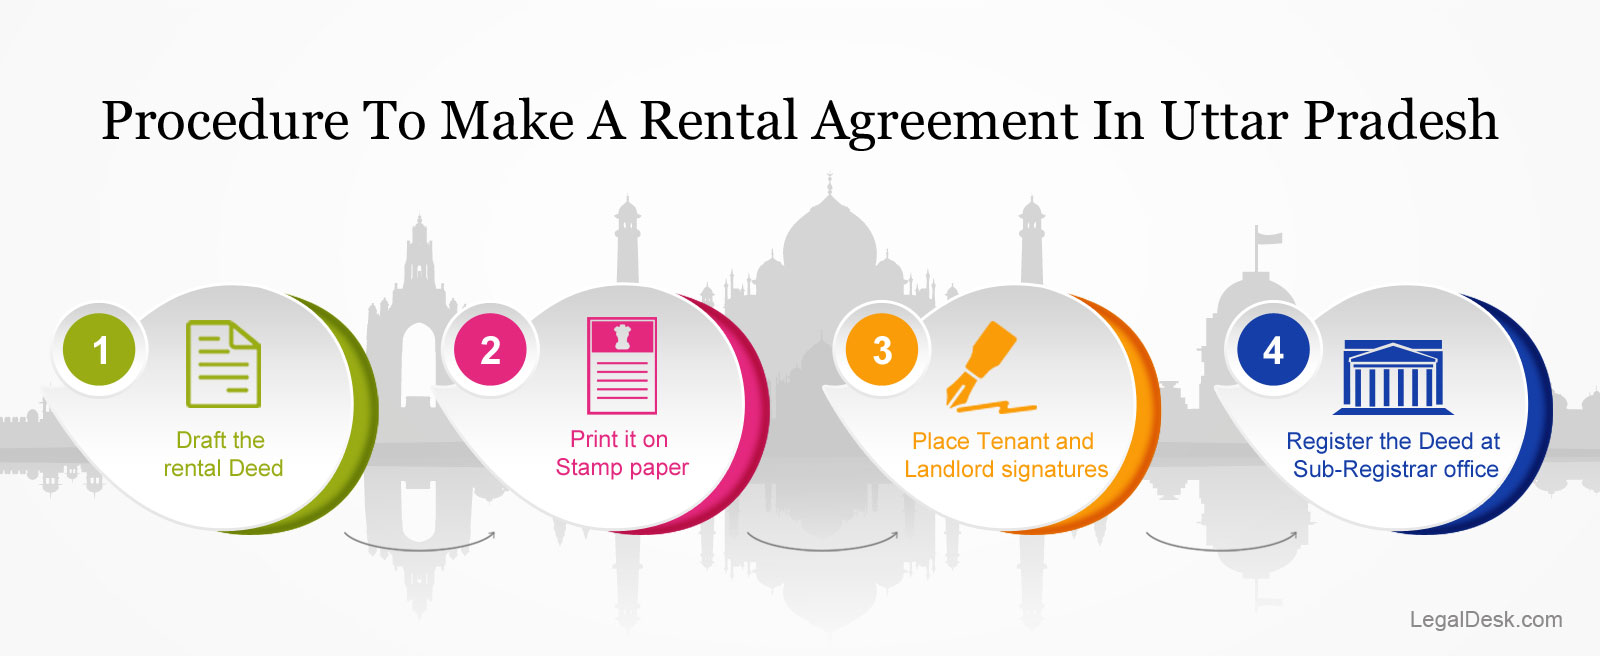 Procedure-for-rental-agreement-in-UP